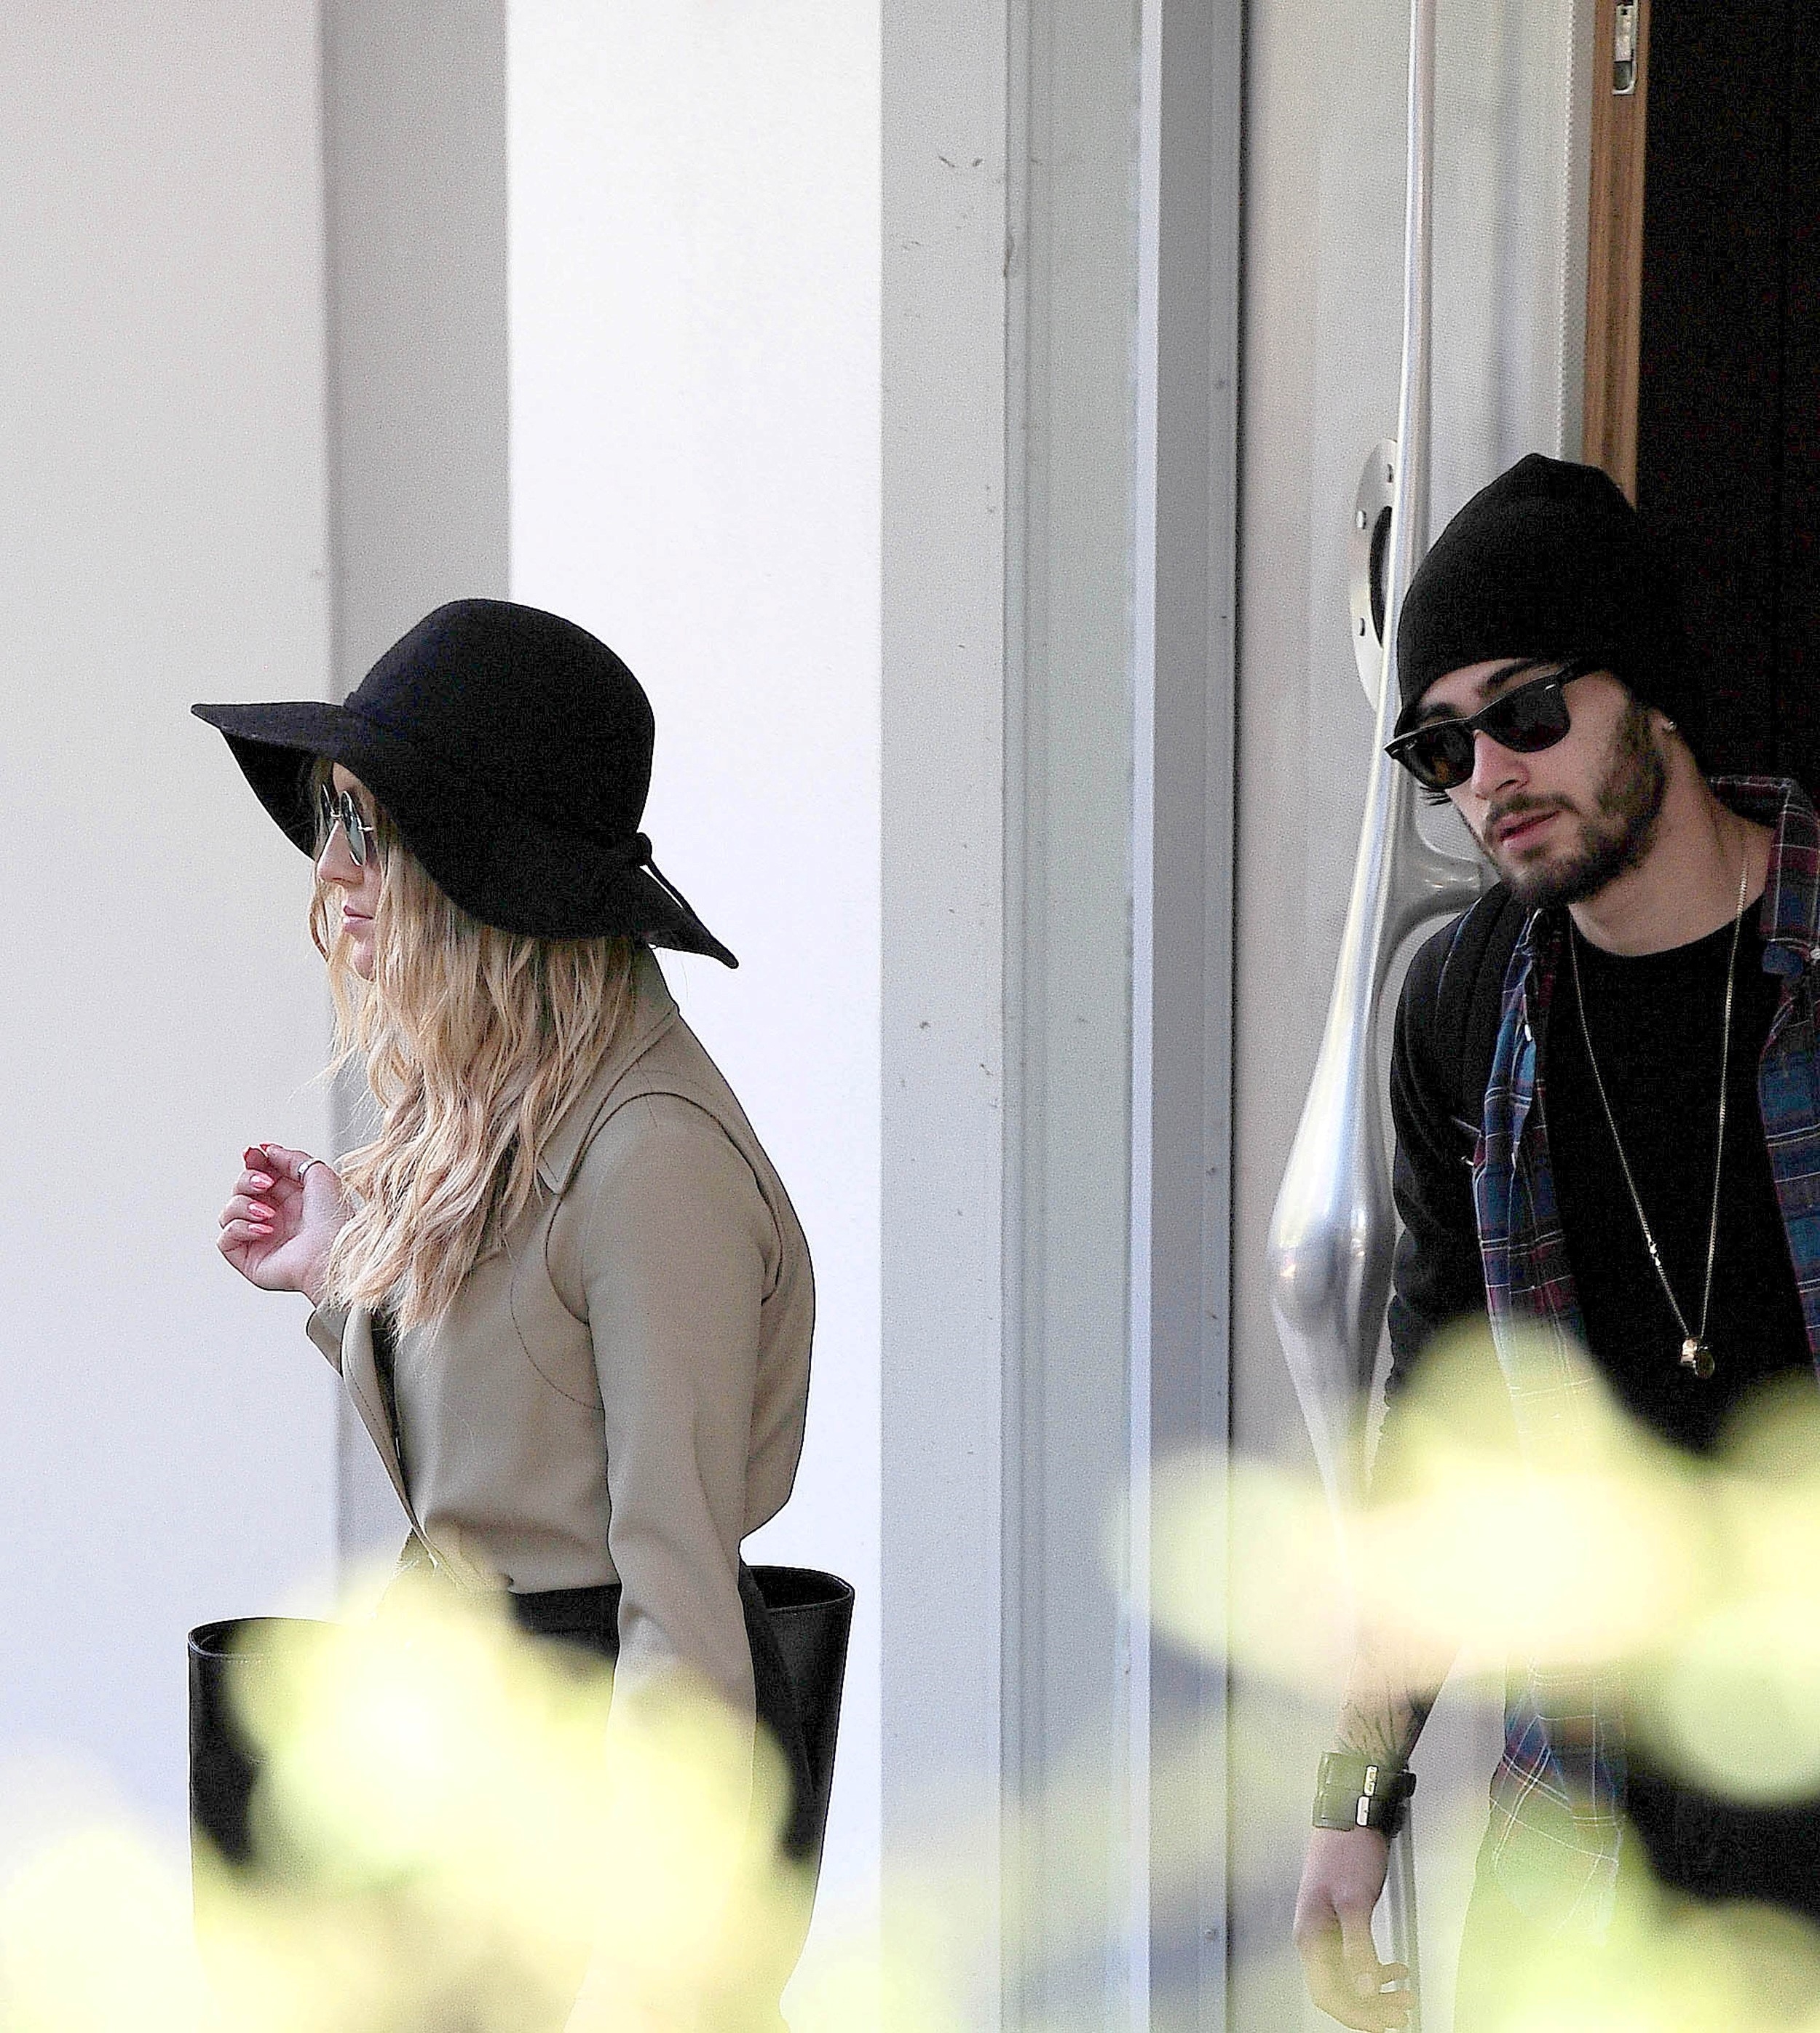 Zayn Malik and Perrie Edwards are pictured together; Perrie wears a wide-brimmed hat and sunglasses, while Zayn wears a beanie and dark sunglasses